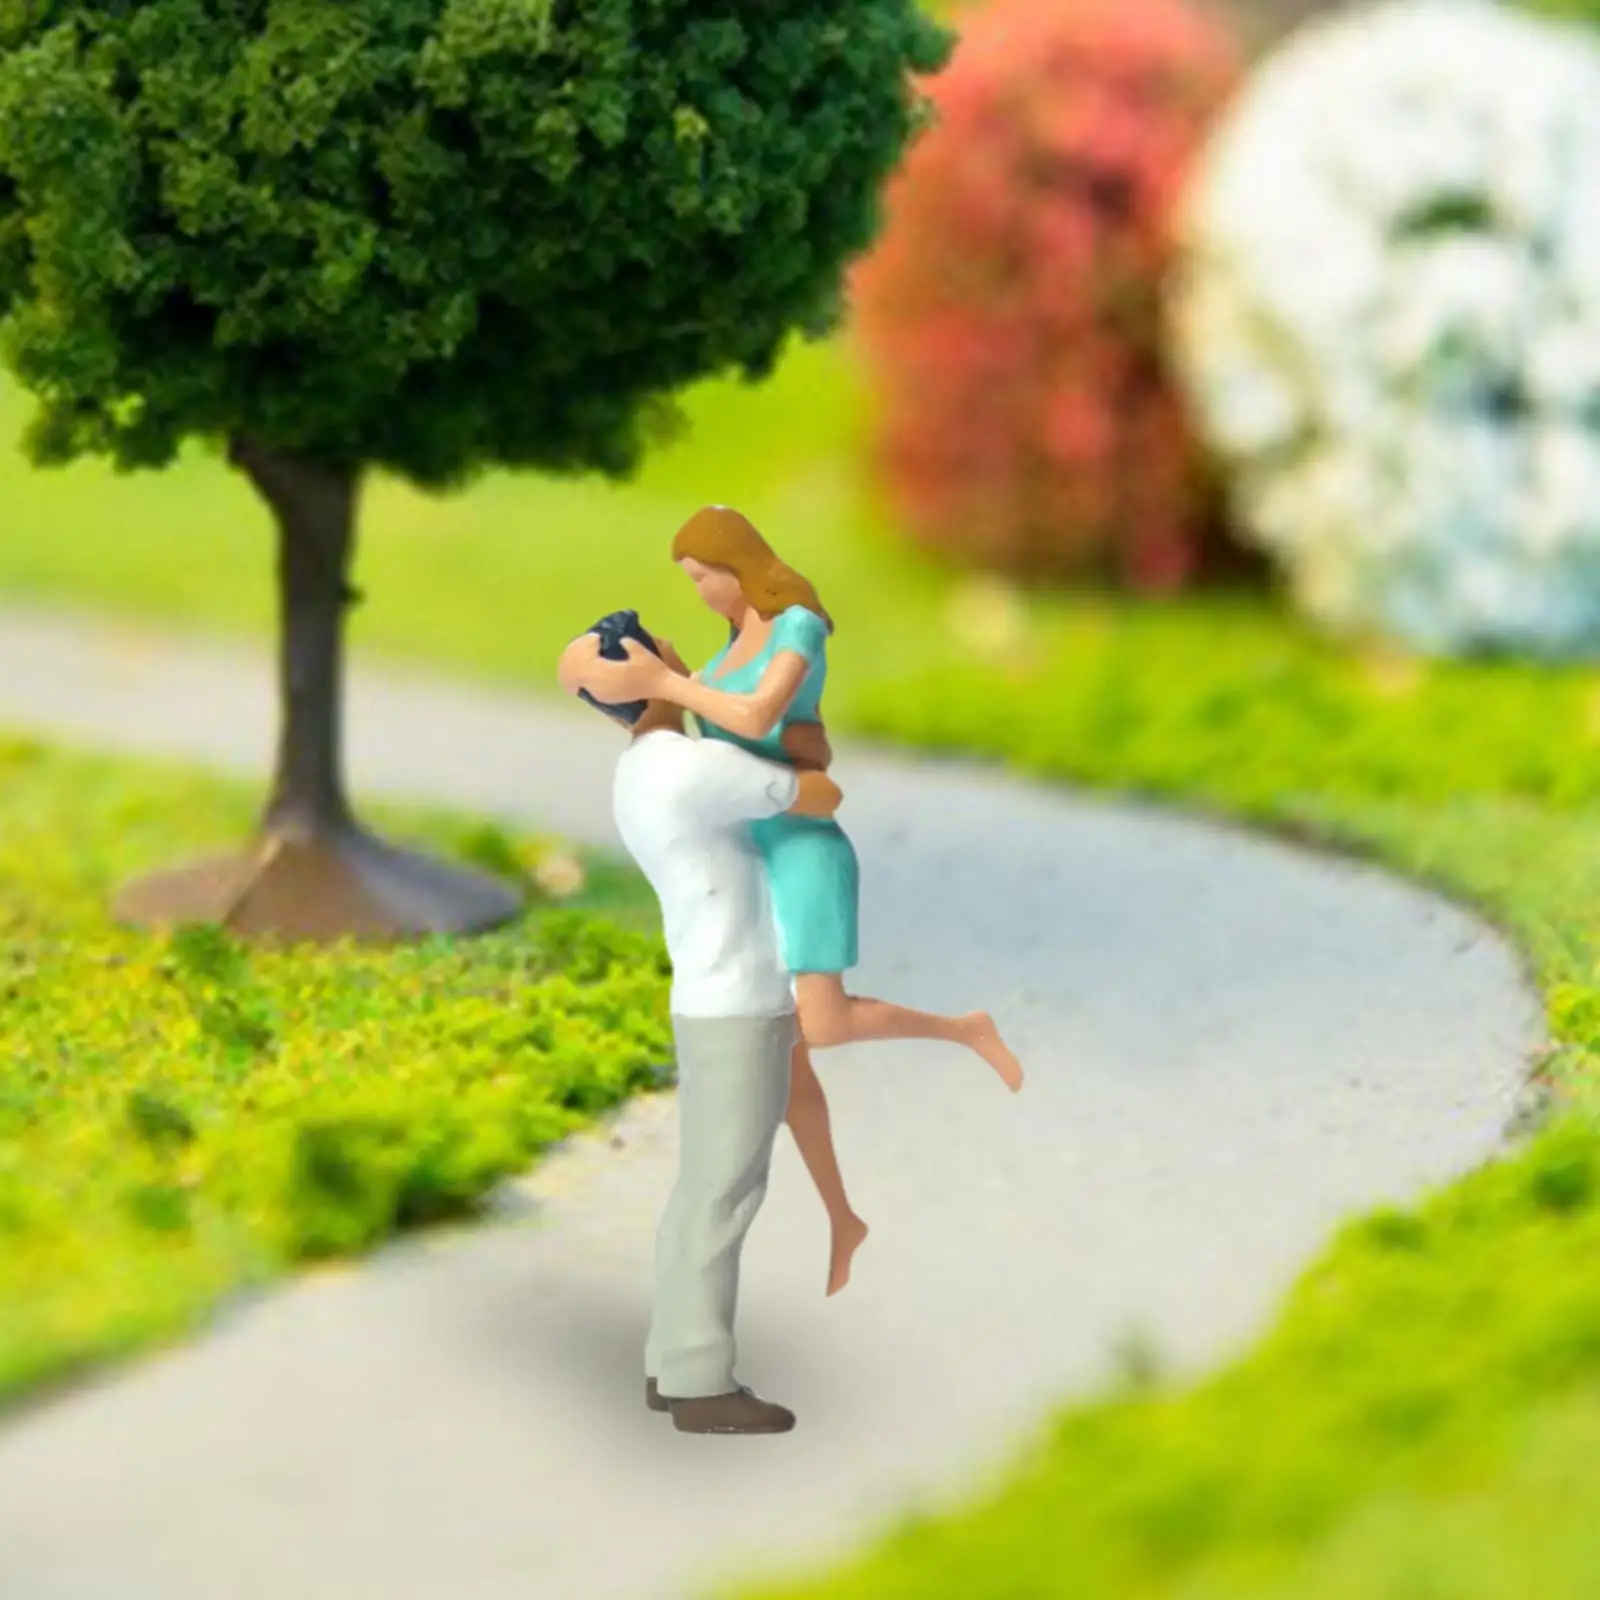 Resin 1/64 Hugging Couple Model Figure Collectibles Model Trains People Figures for DIY Scene Dollhouse Photography Props Layout